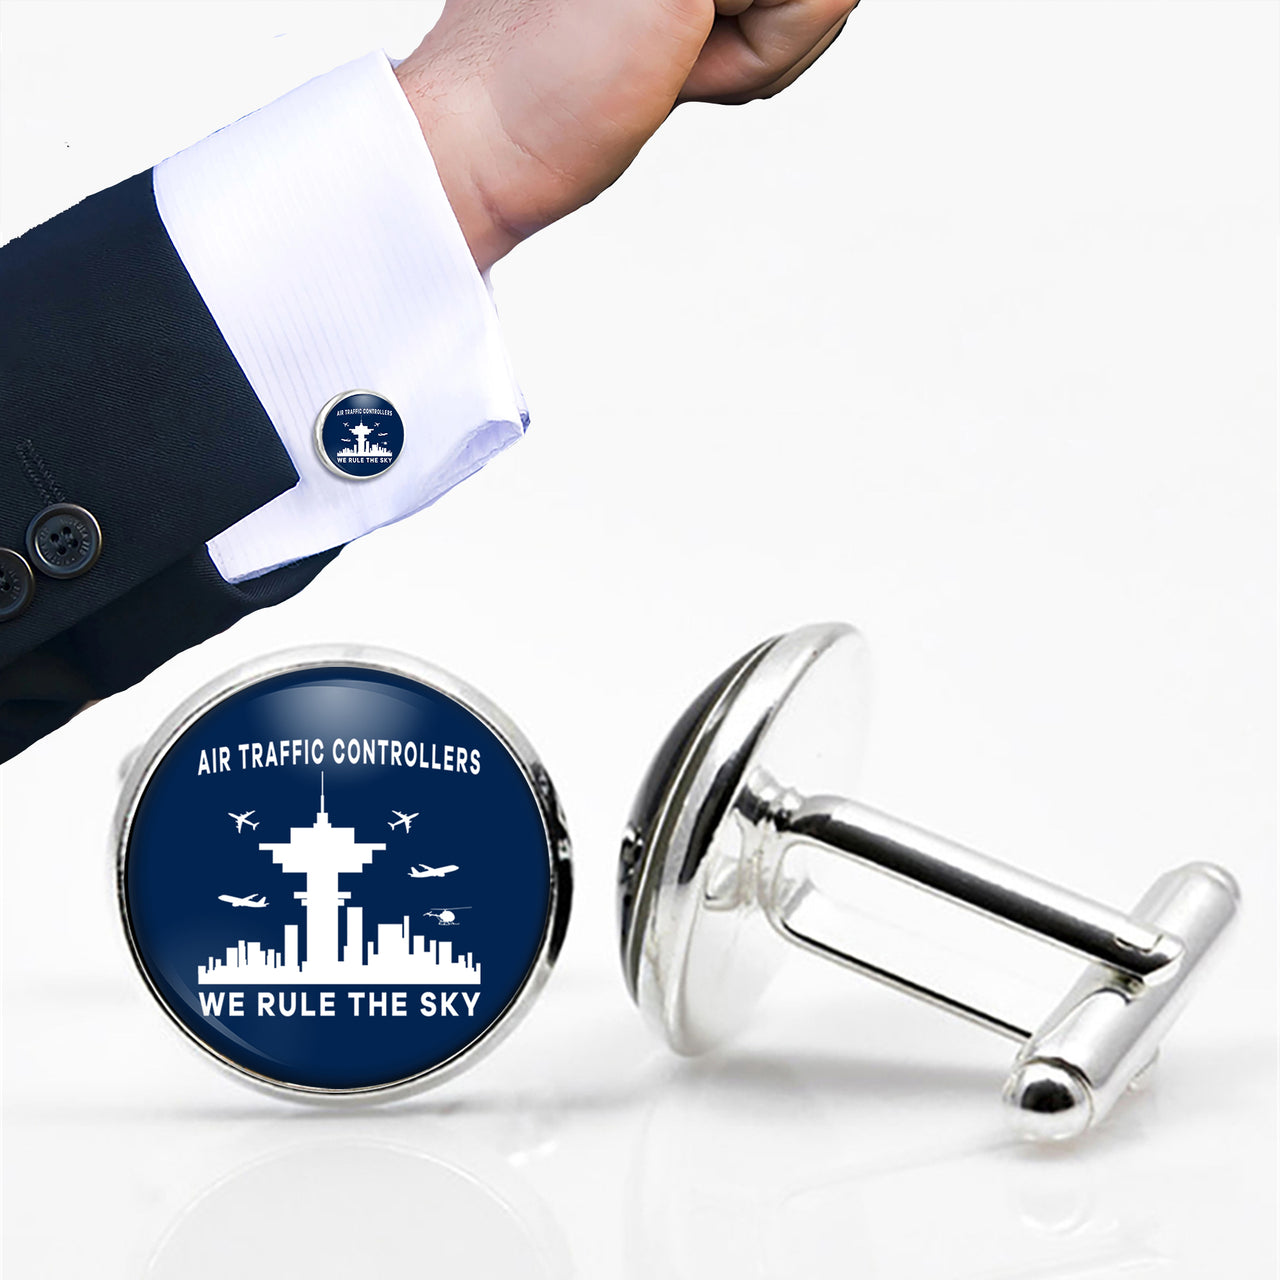 Air Traffic Controllers - We Rule The Sky Designed Cuff Links